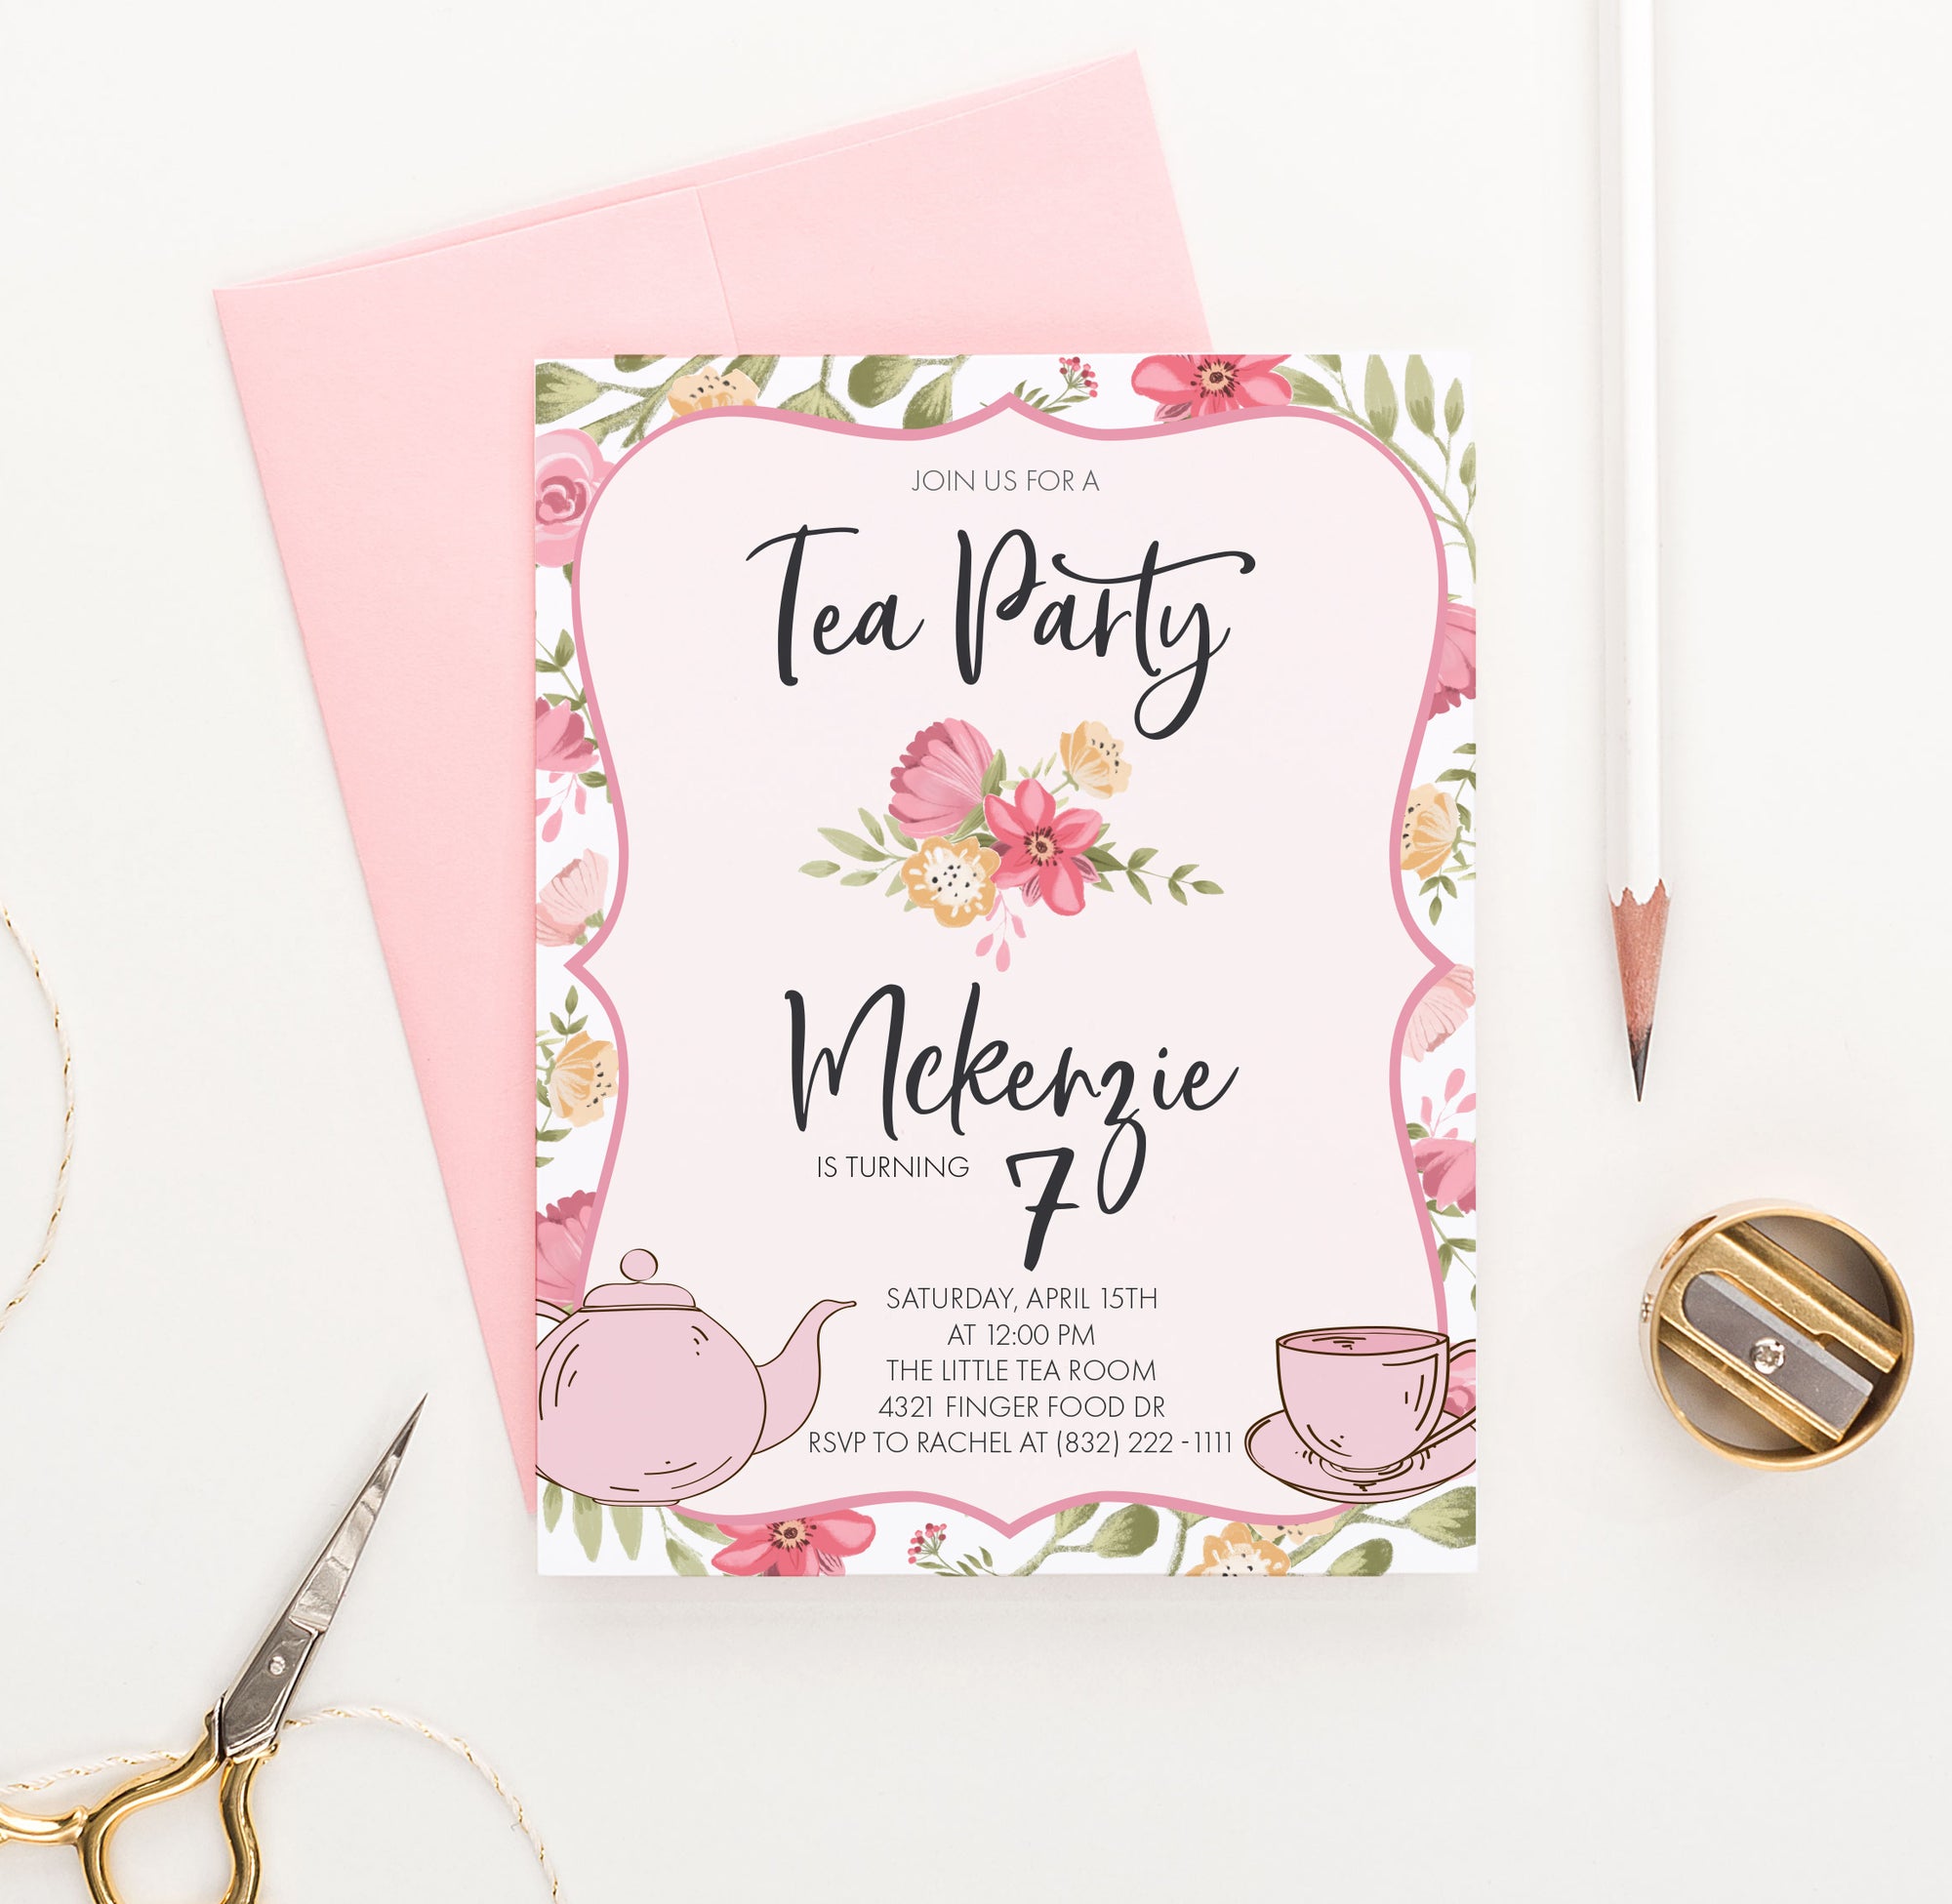 Personalized Tea Party Birthday Invitations With Florals